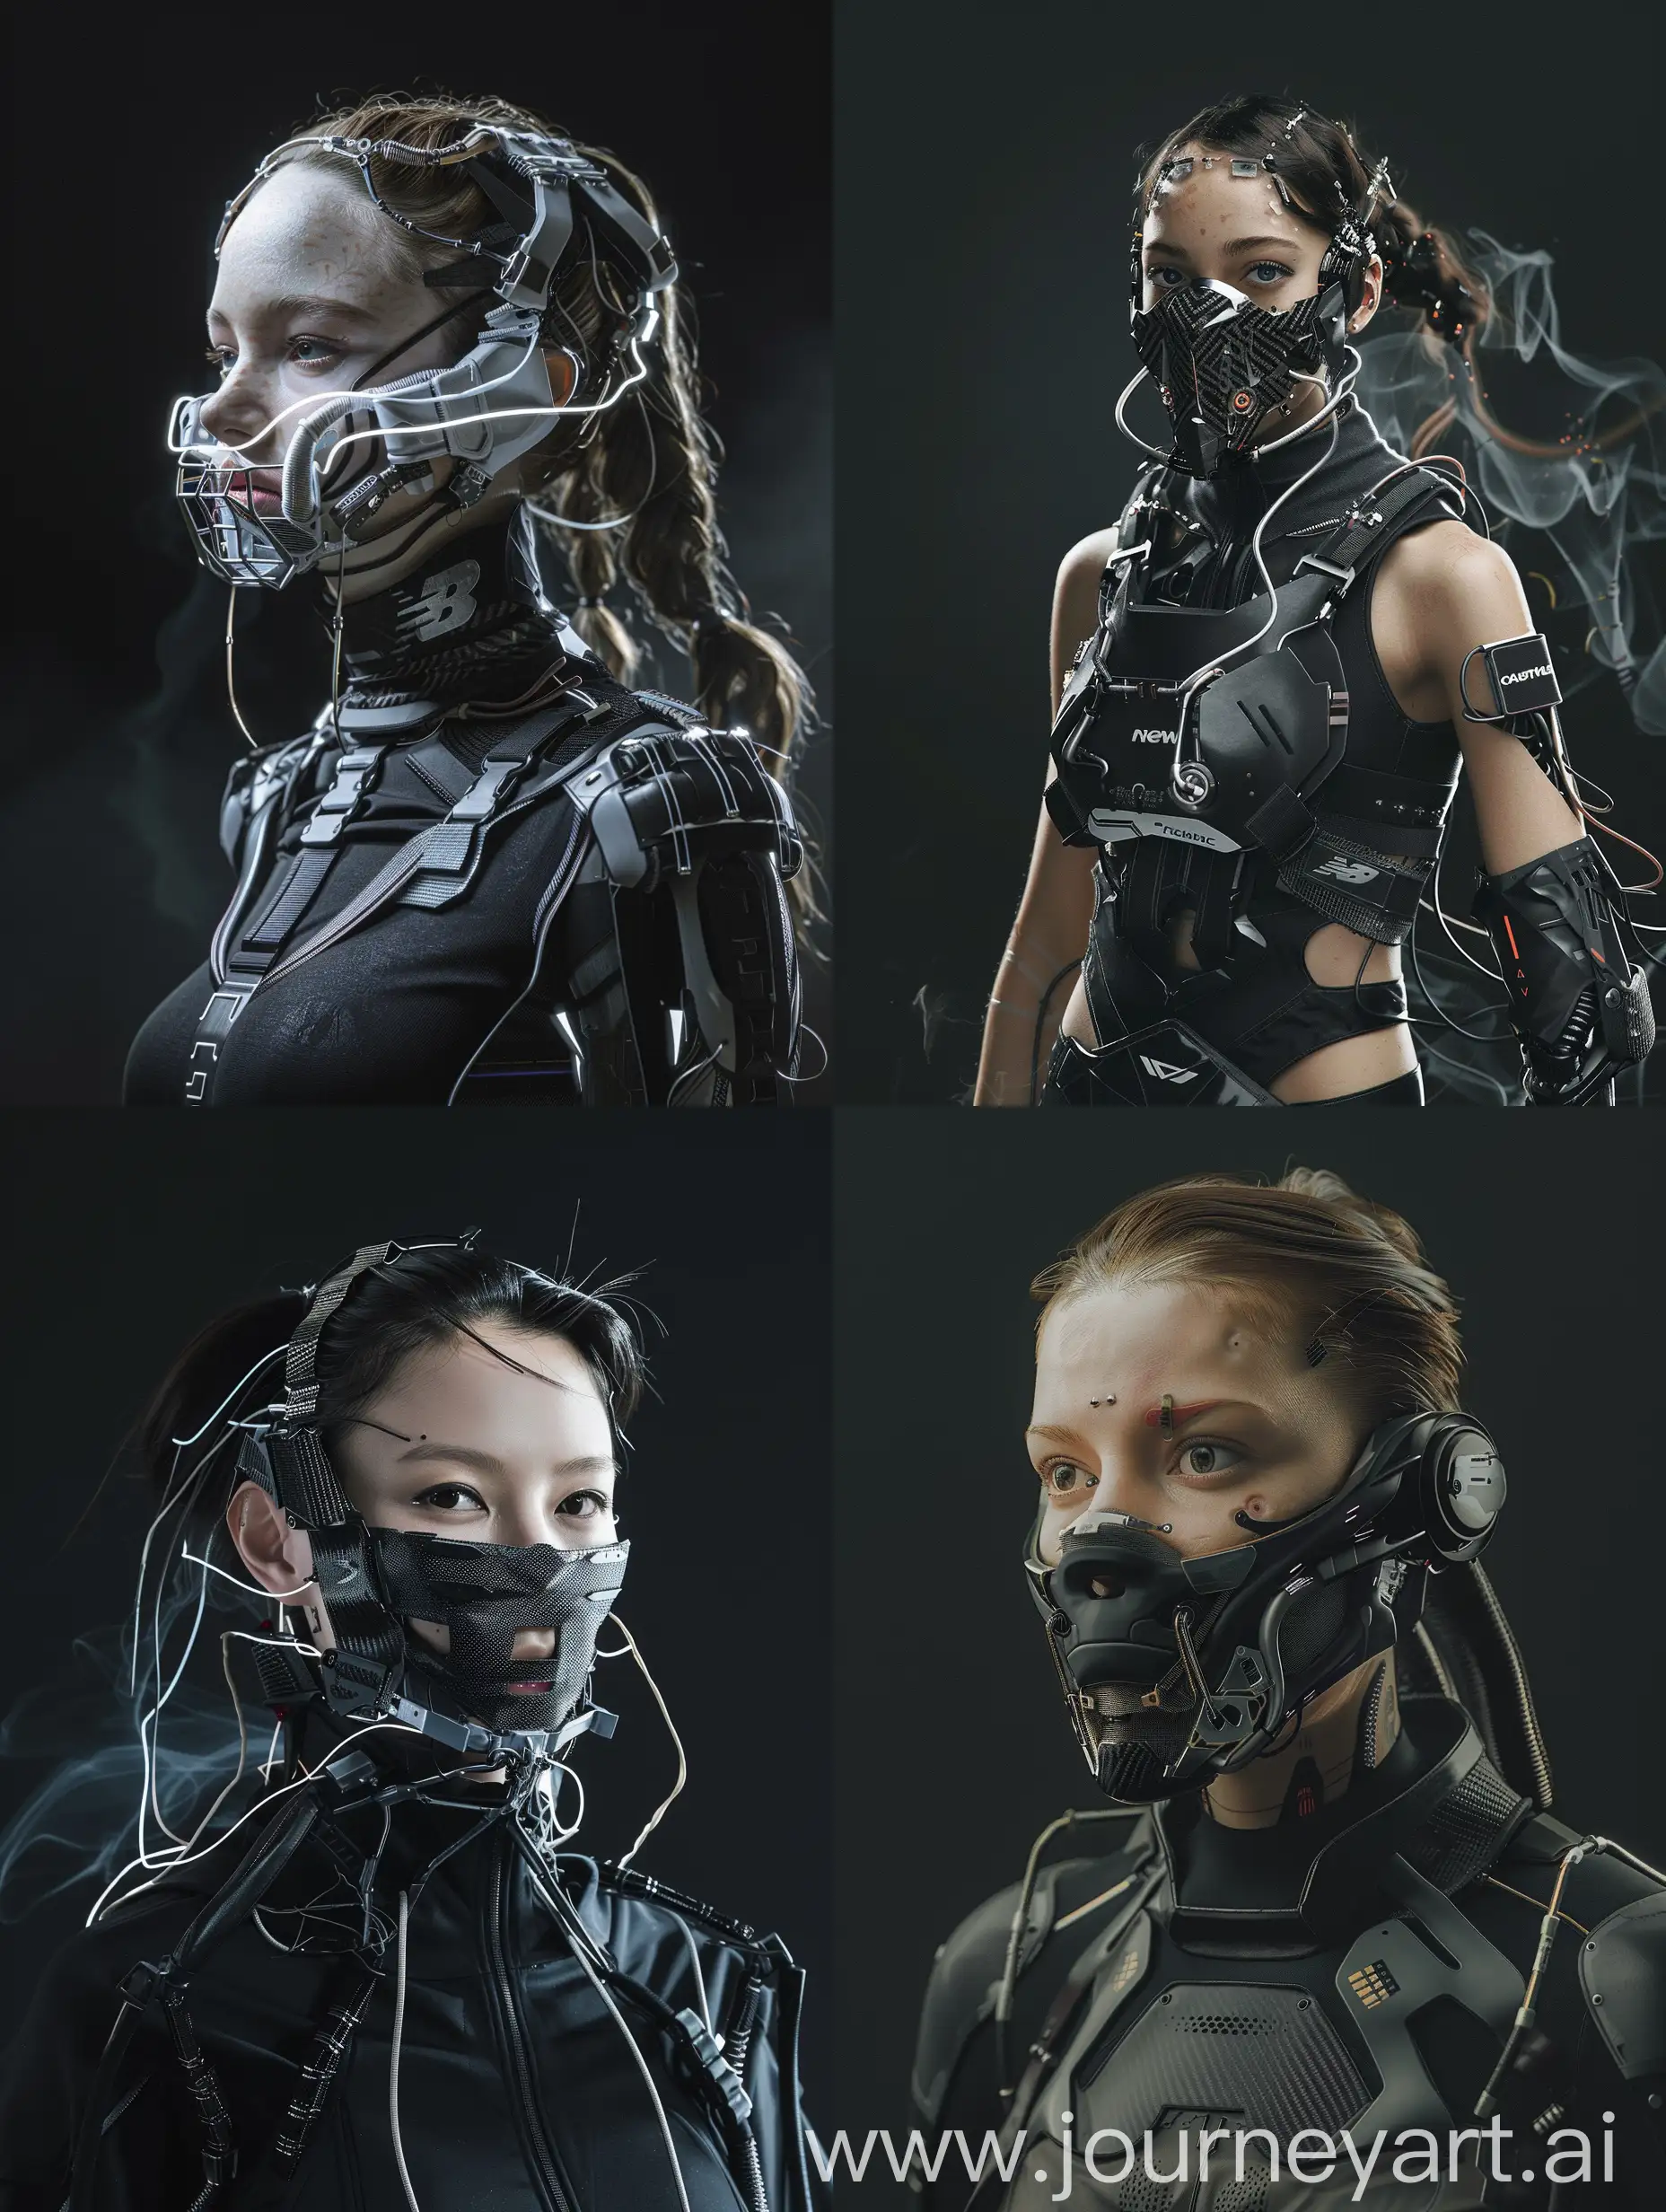 Futuristic-Cyberpunk-Character-with-Cybernetic-Mask-in-Dynamic-Action